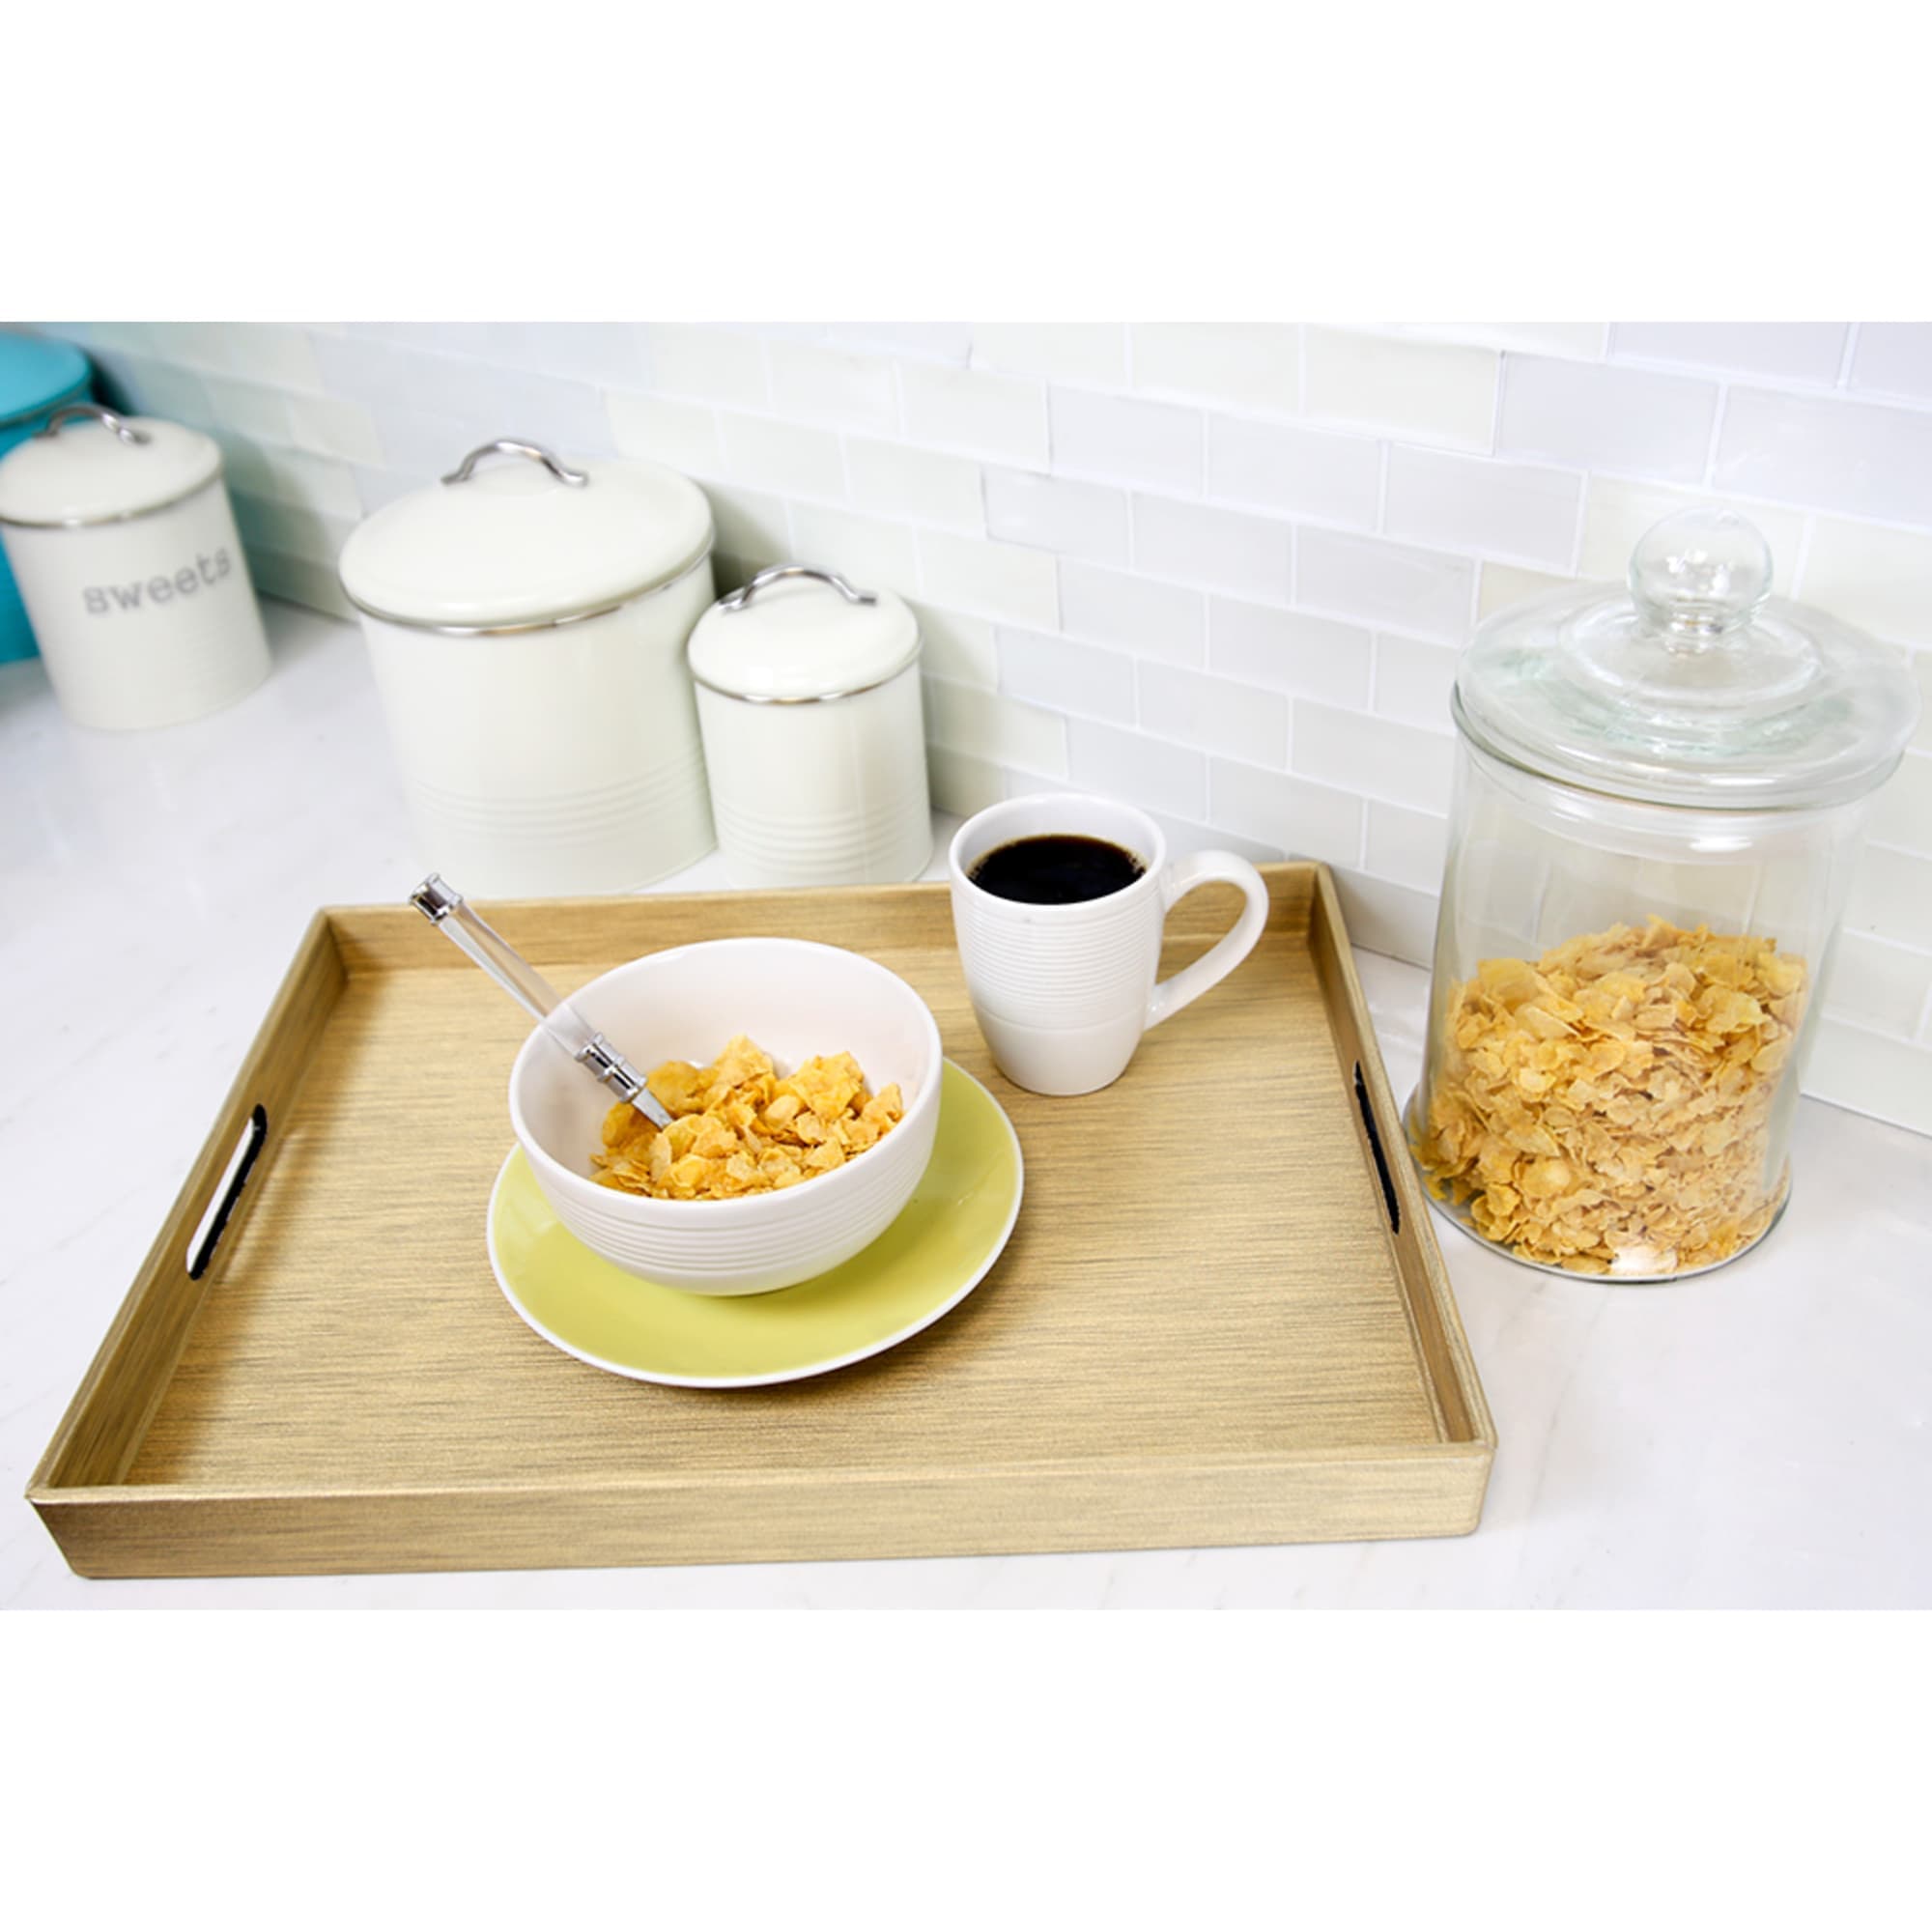 Home Basics Metallic Weave Serving Tray with Cut-Out Handles, Gold $12.00 EACH, CASE PACK OF 6